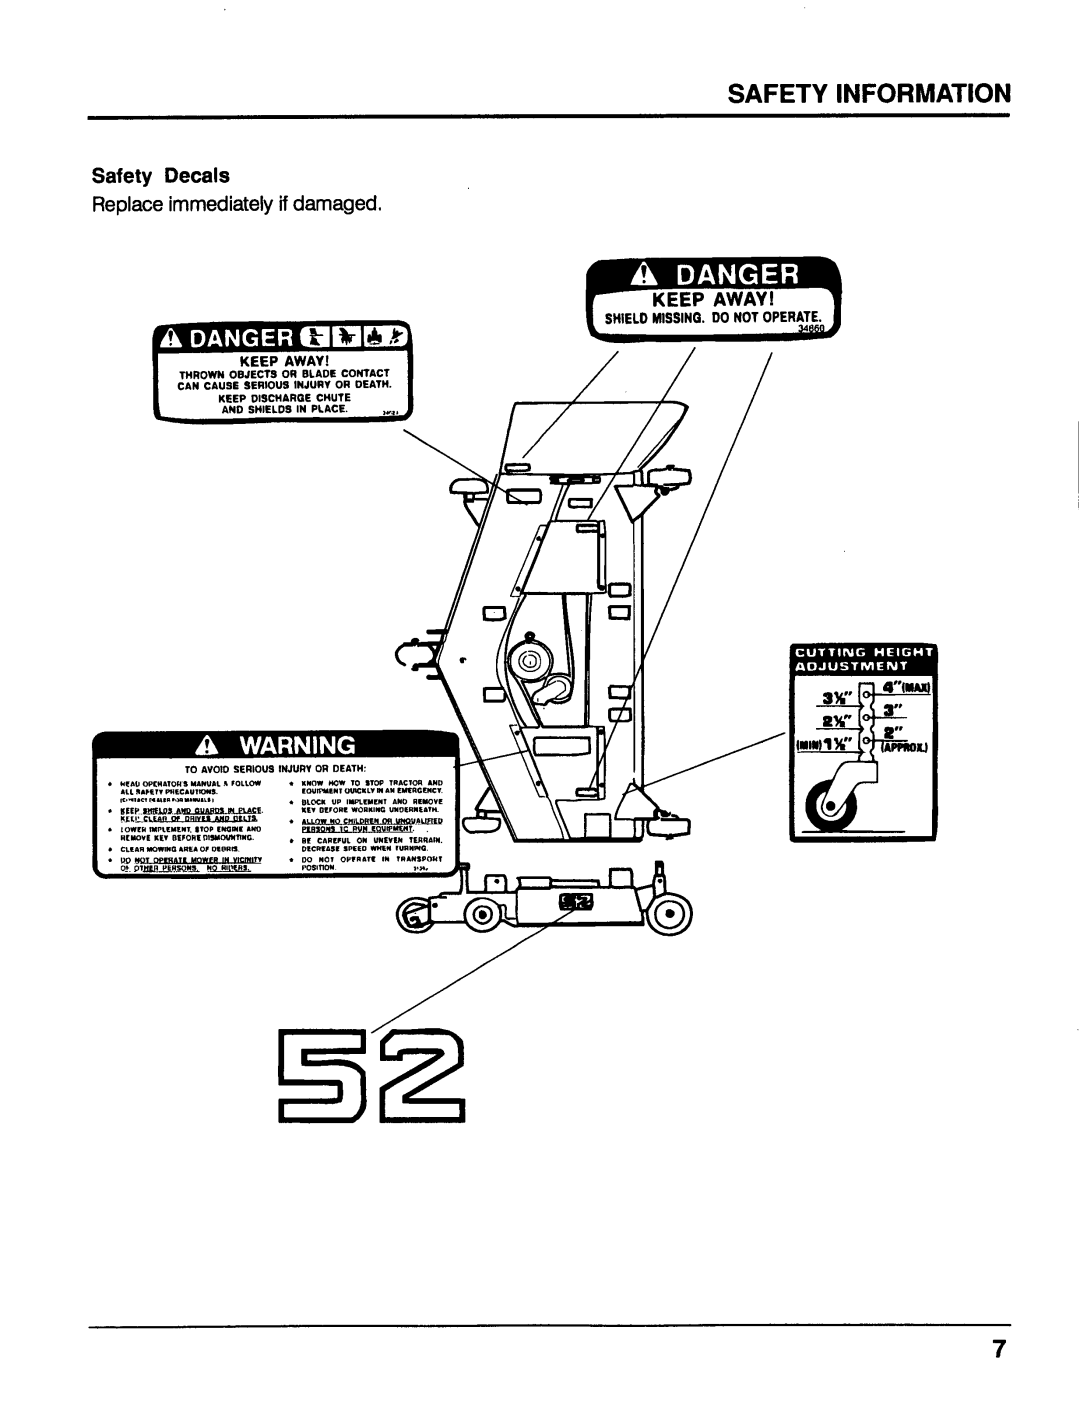 Honda Power Equipment MM52 manual Safety Decals, Safety Information, Keep Away, Thrown Objects Or Blade Contact, Disciiarqe 